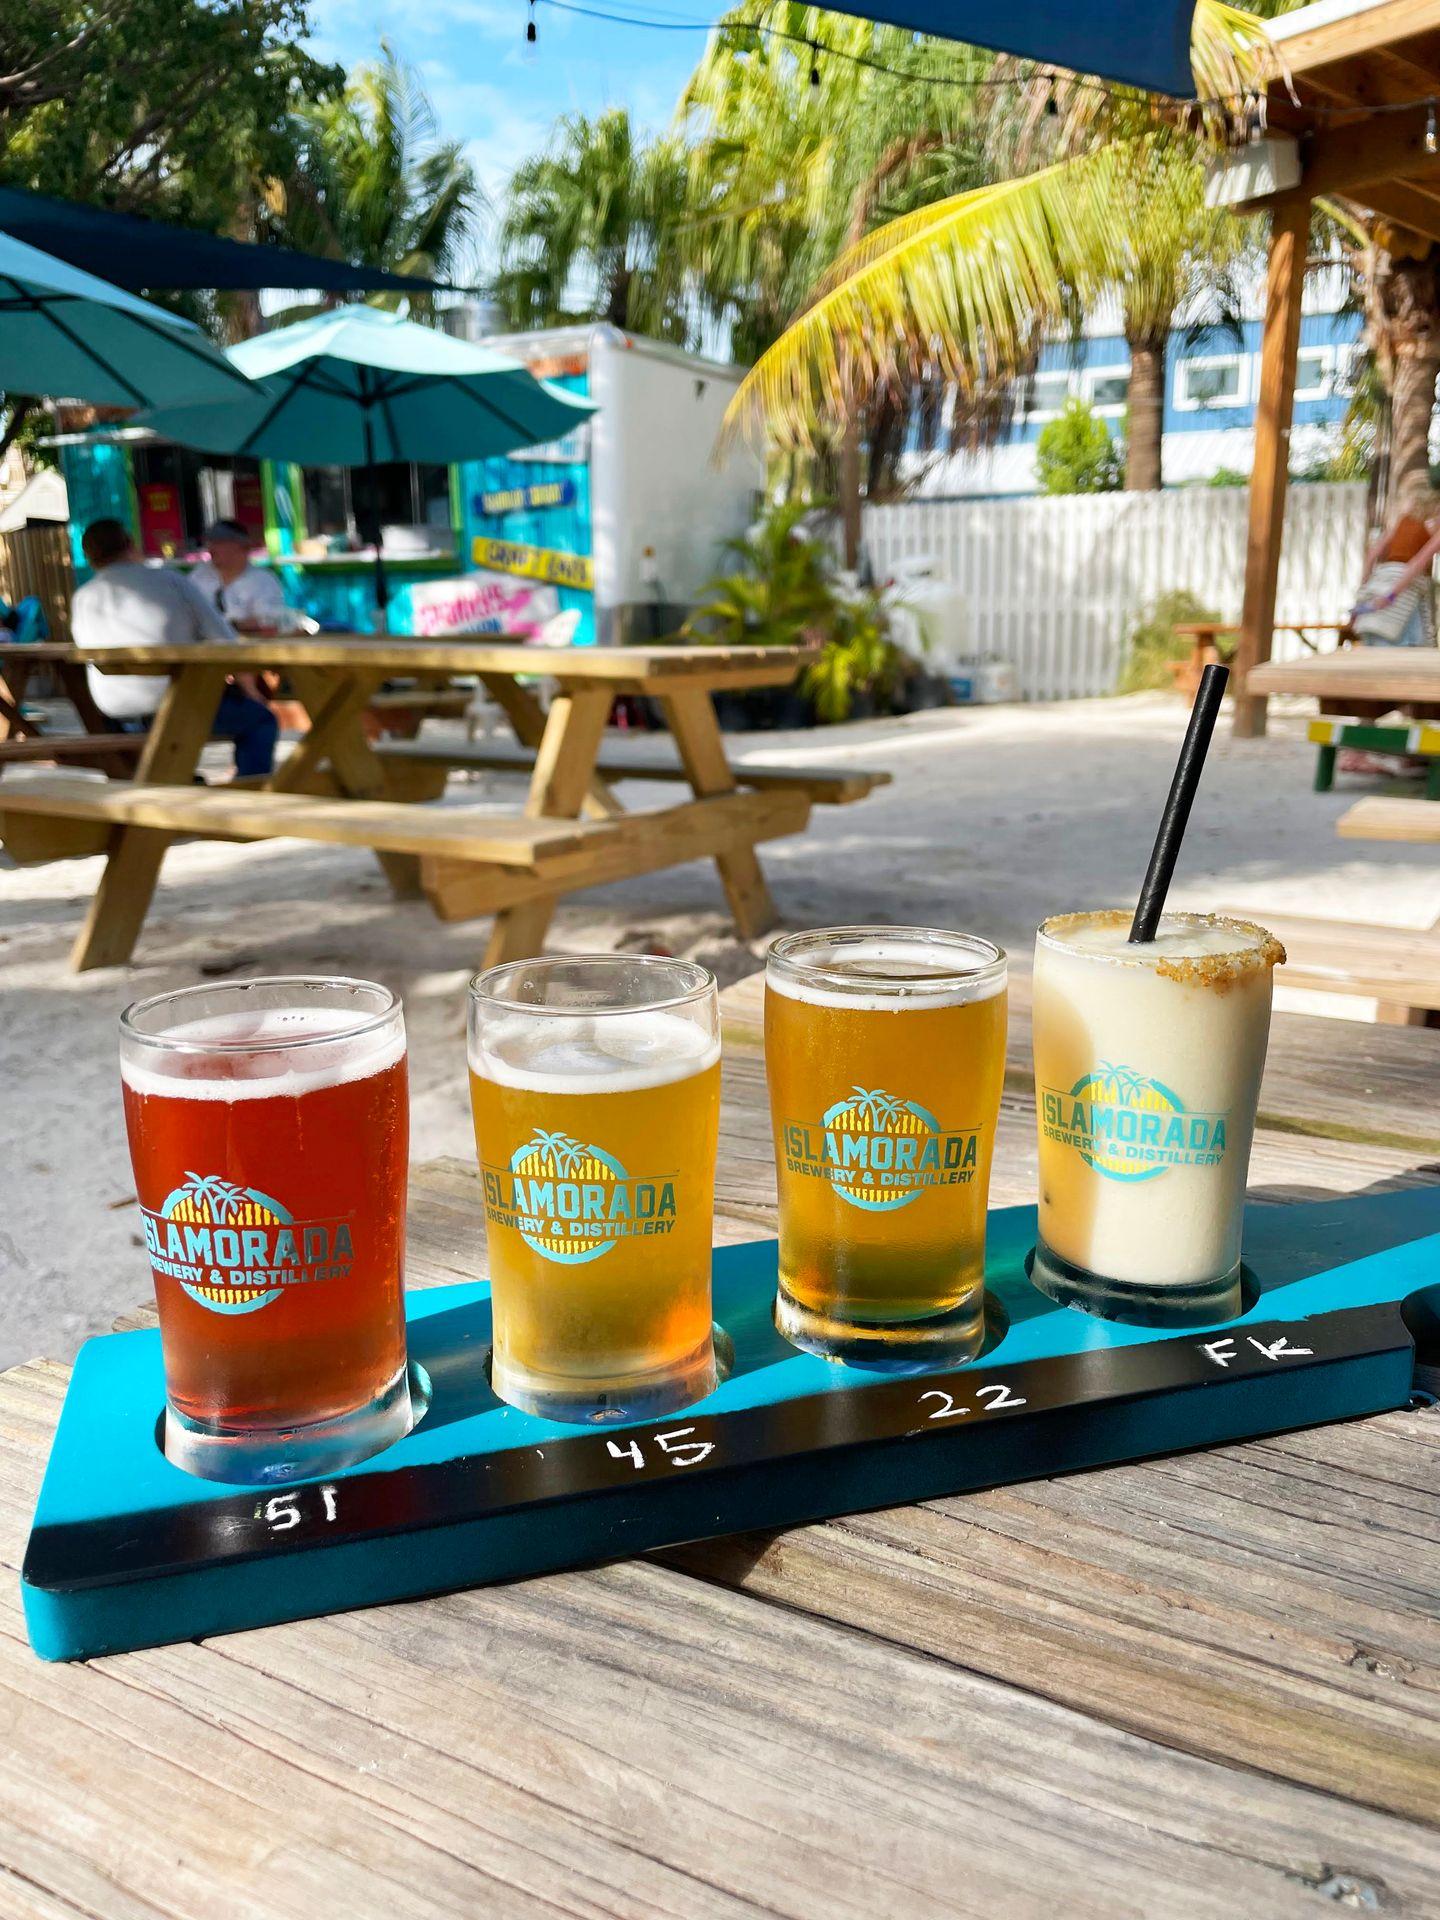 A flight of beer and a key lime pie cocktail at Islamorada Brewery. It sits on a picnic table in the outdoor patio area and there is a palm tree in the background.